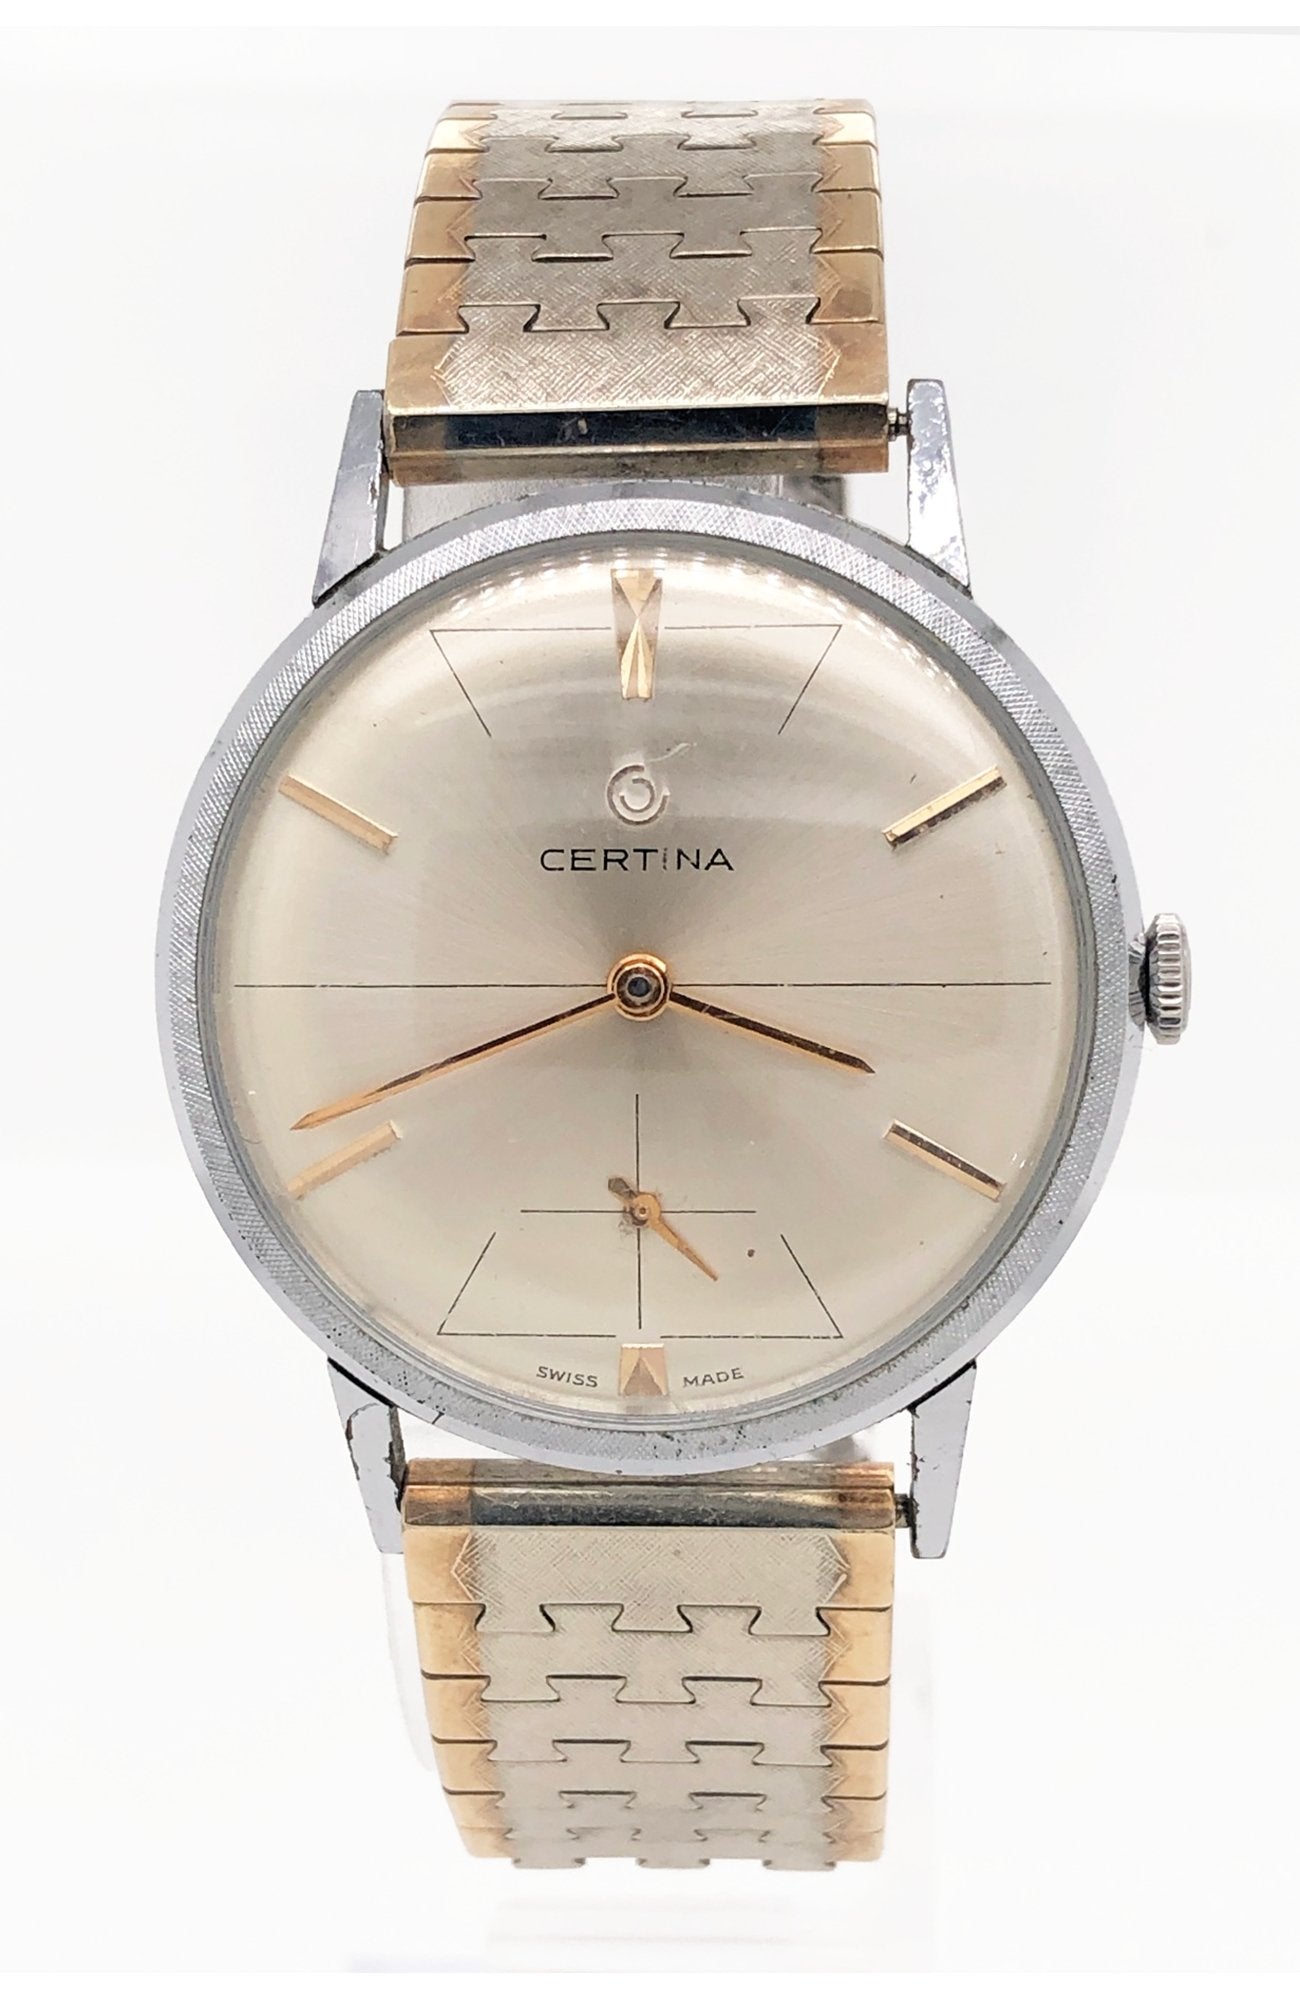 Certina - Counting Time Watch Purveyors